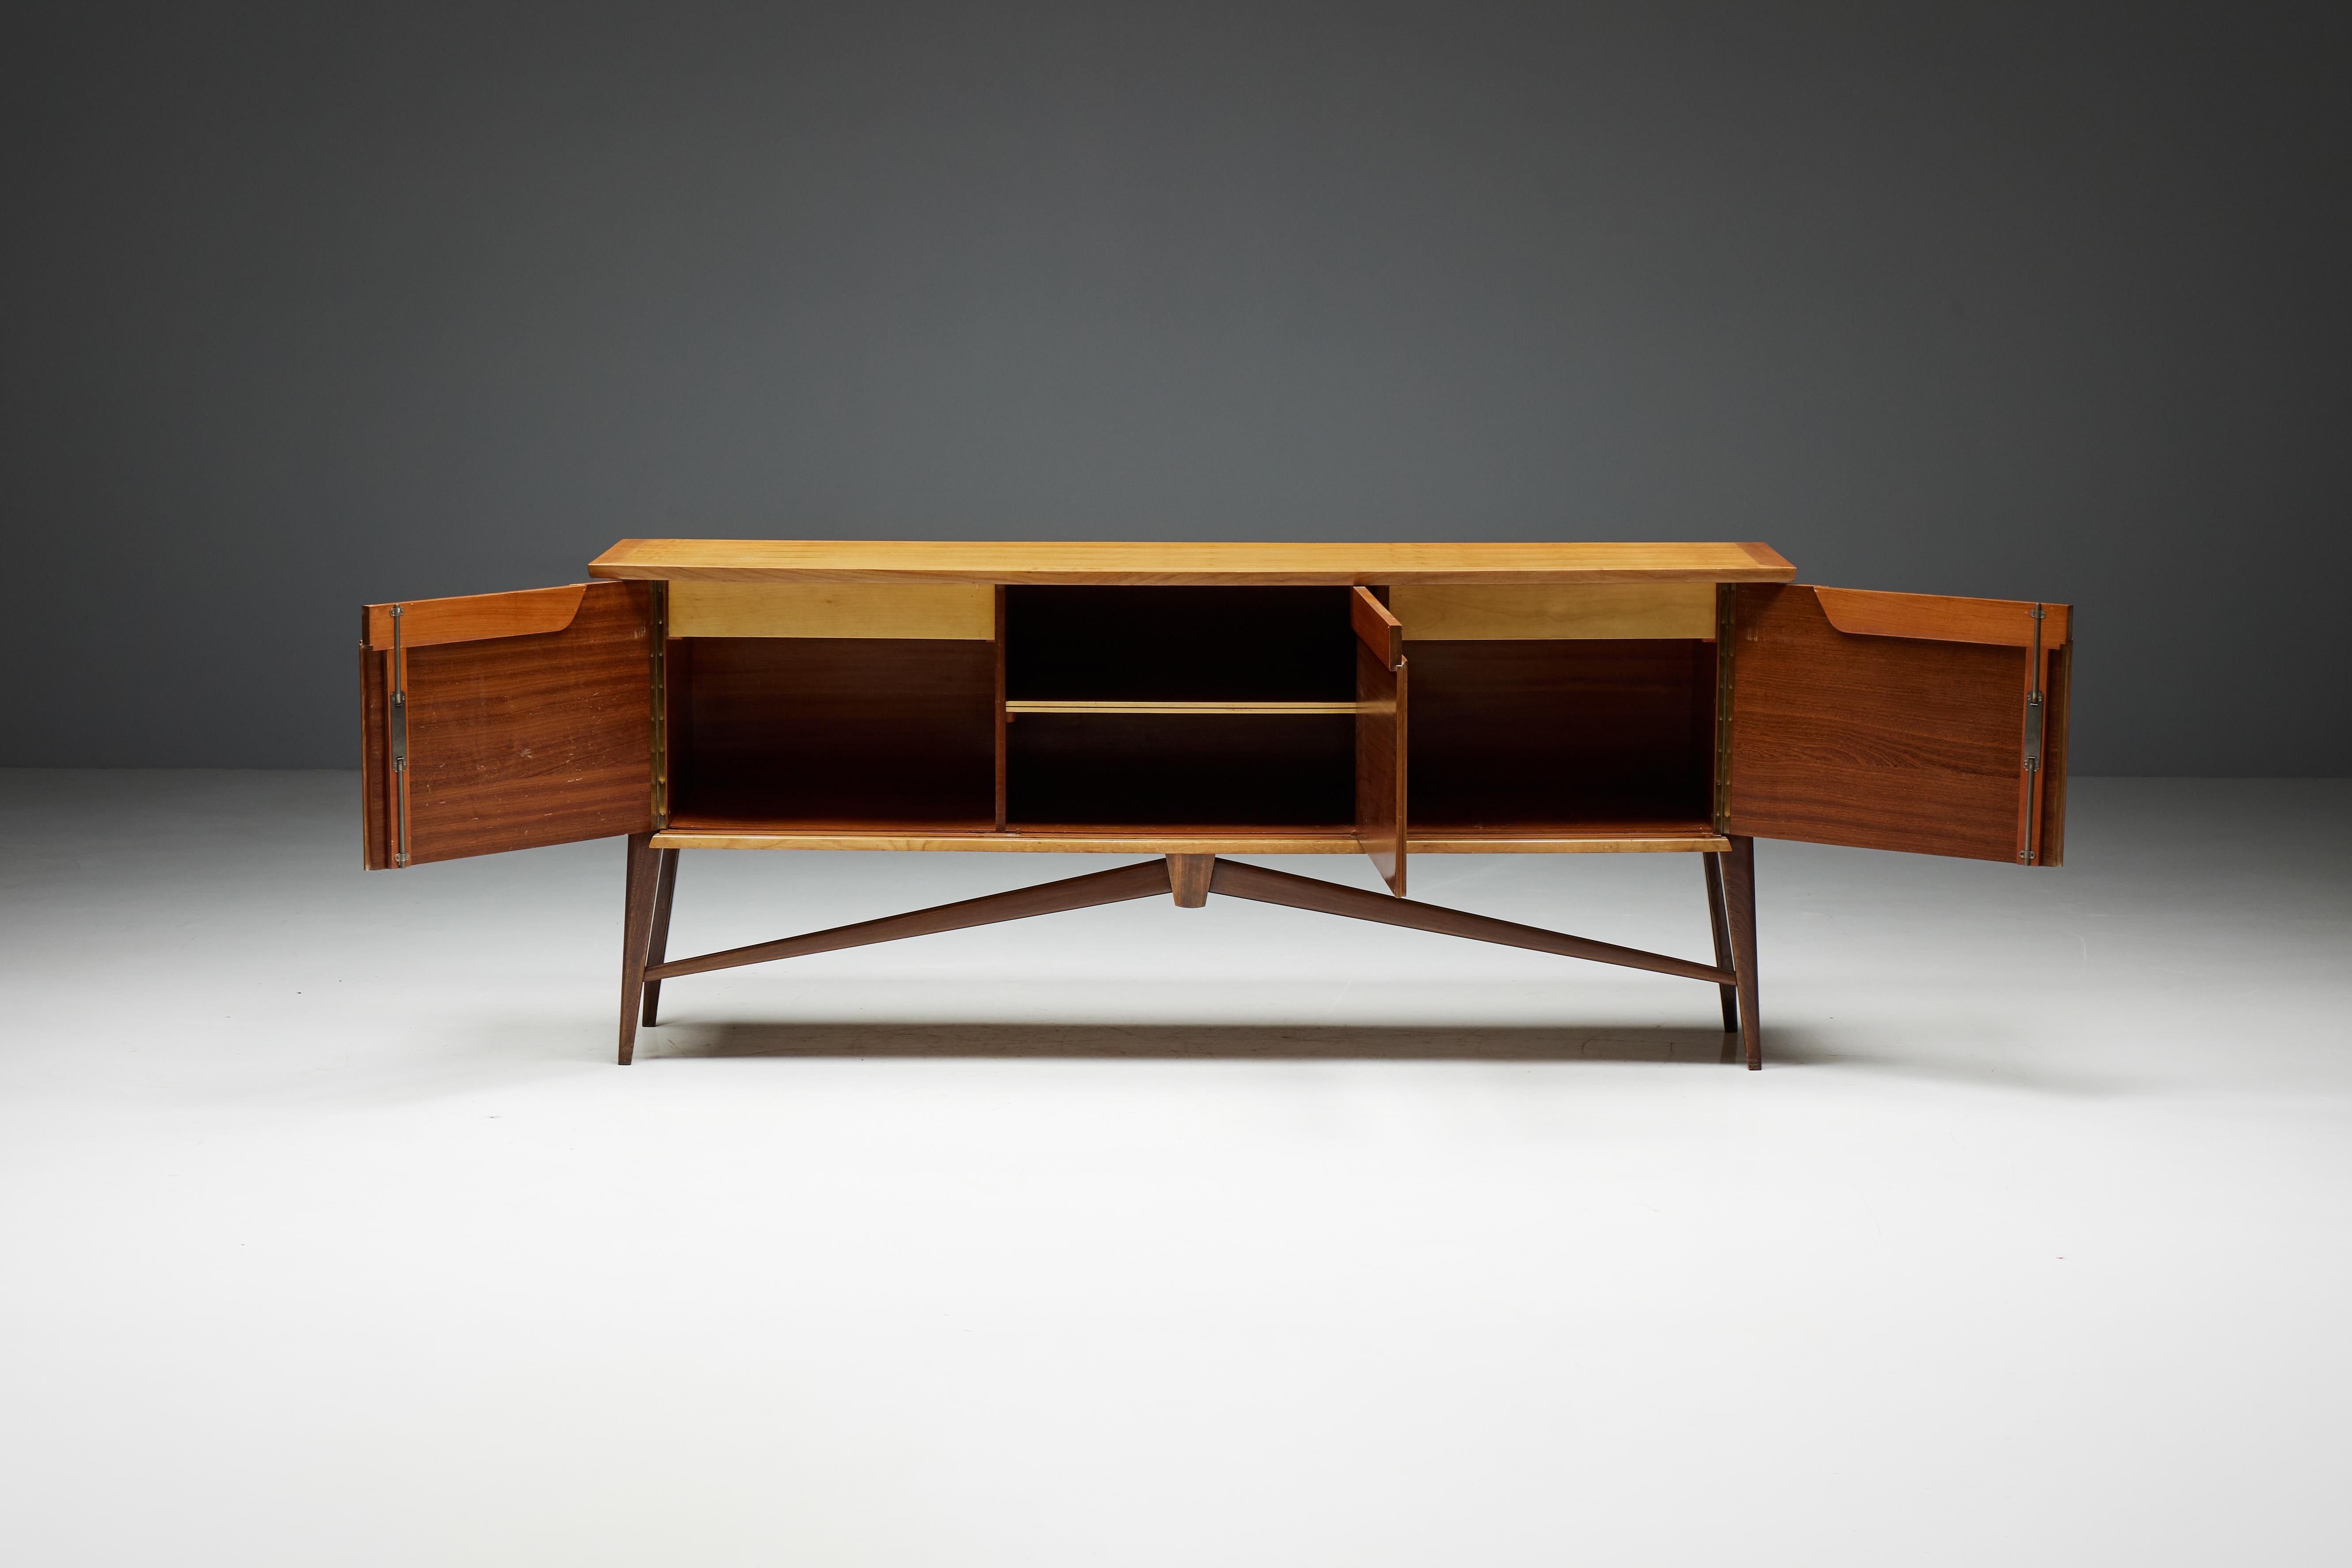 Credenza for De Coene, crafted in 1958 by Belgian designer Paul Van Den Bulcke. This credenza features a captivating two-tone design in cherry wood and walnut, creating a harmonious blend of warm hues and rich textures. The free-form pin legs